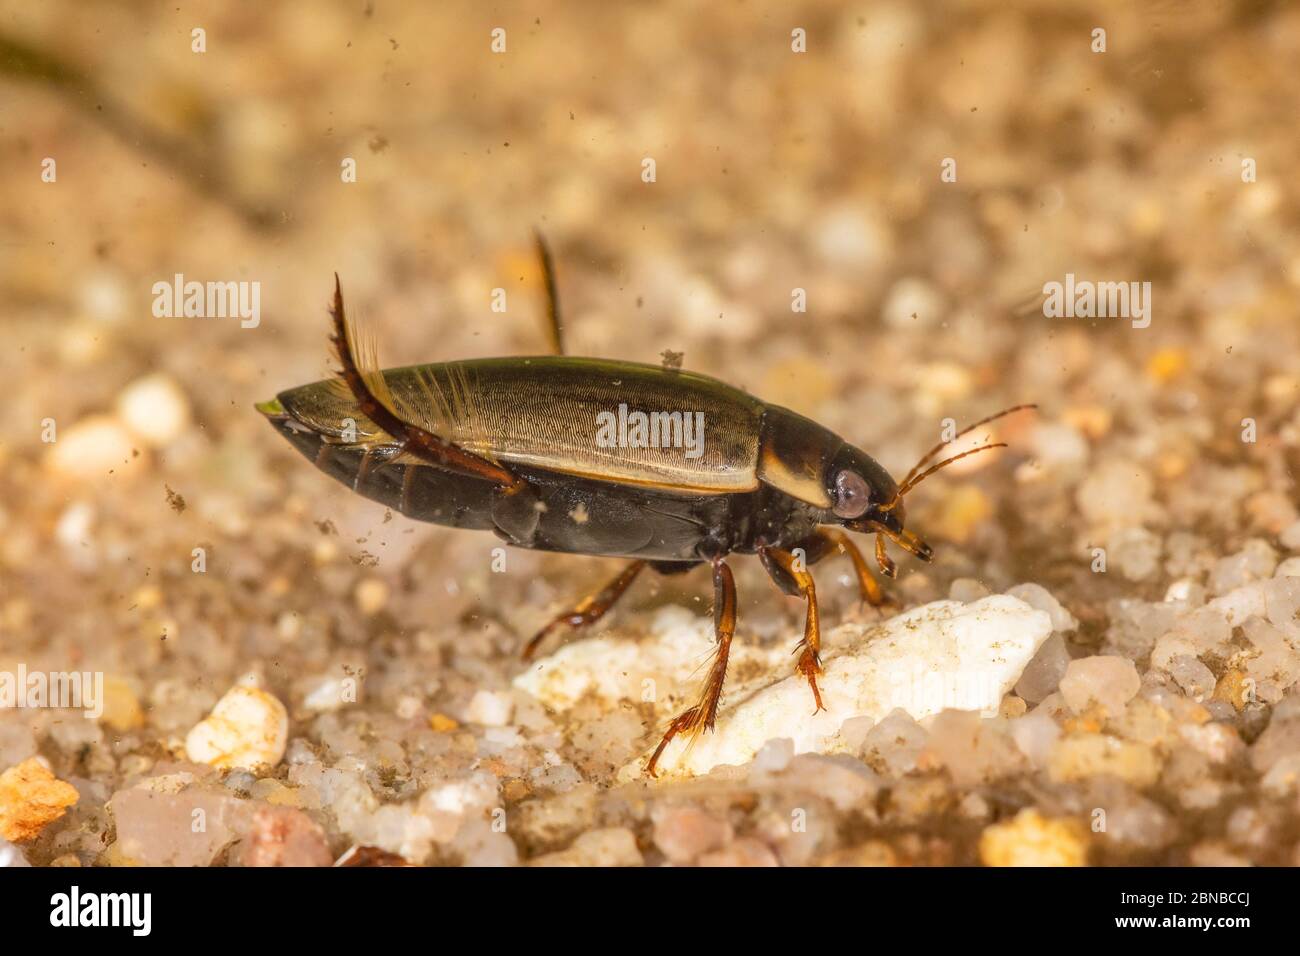 Diving beetle (Colymbetes fuscus), female, Germany Stock Photo